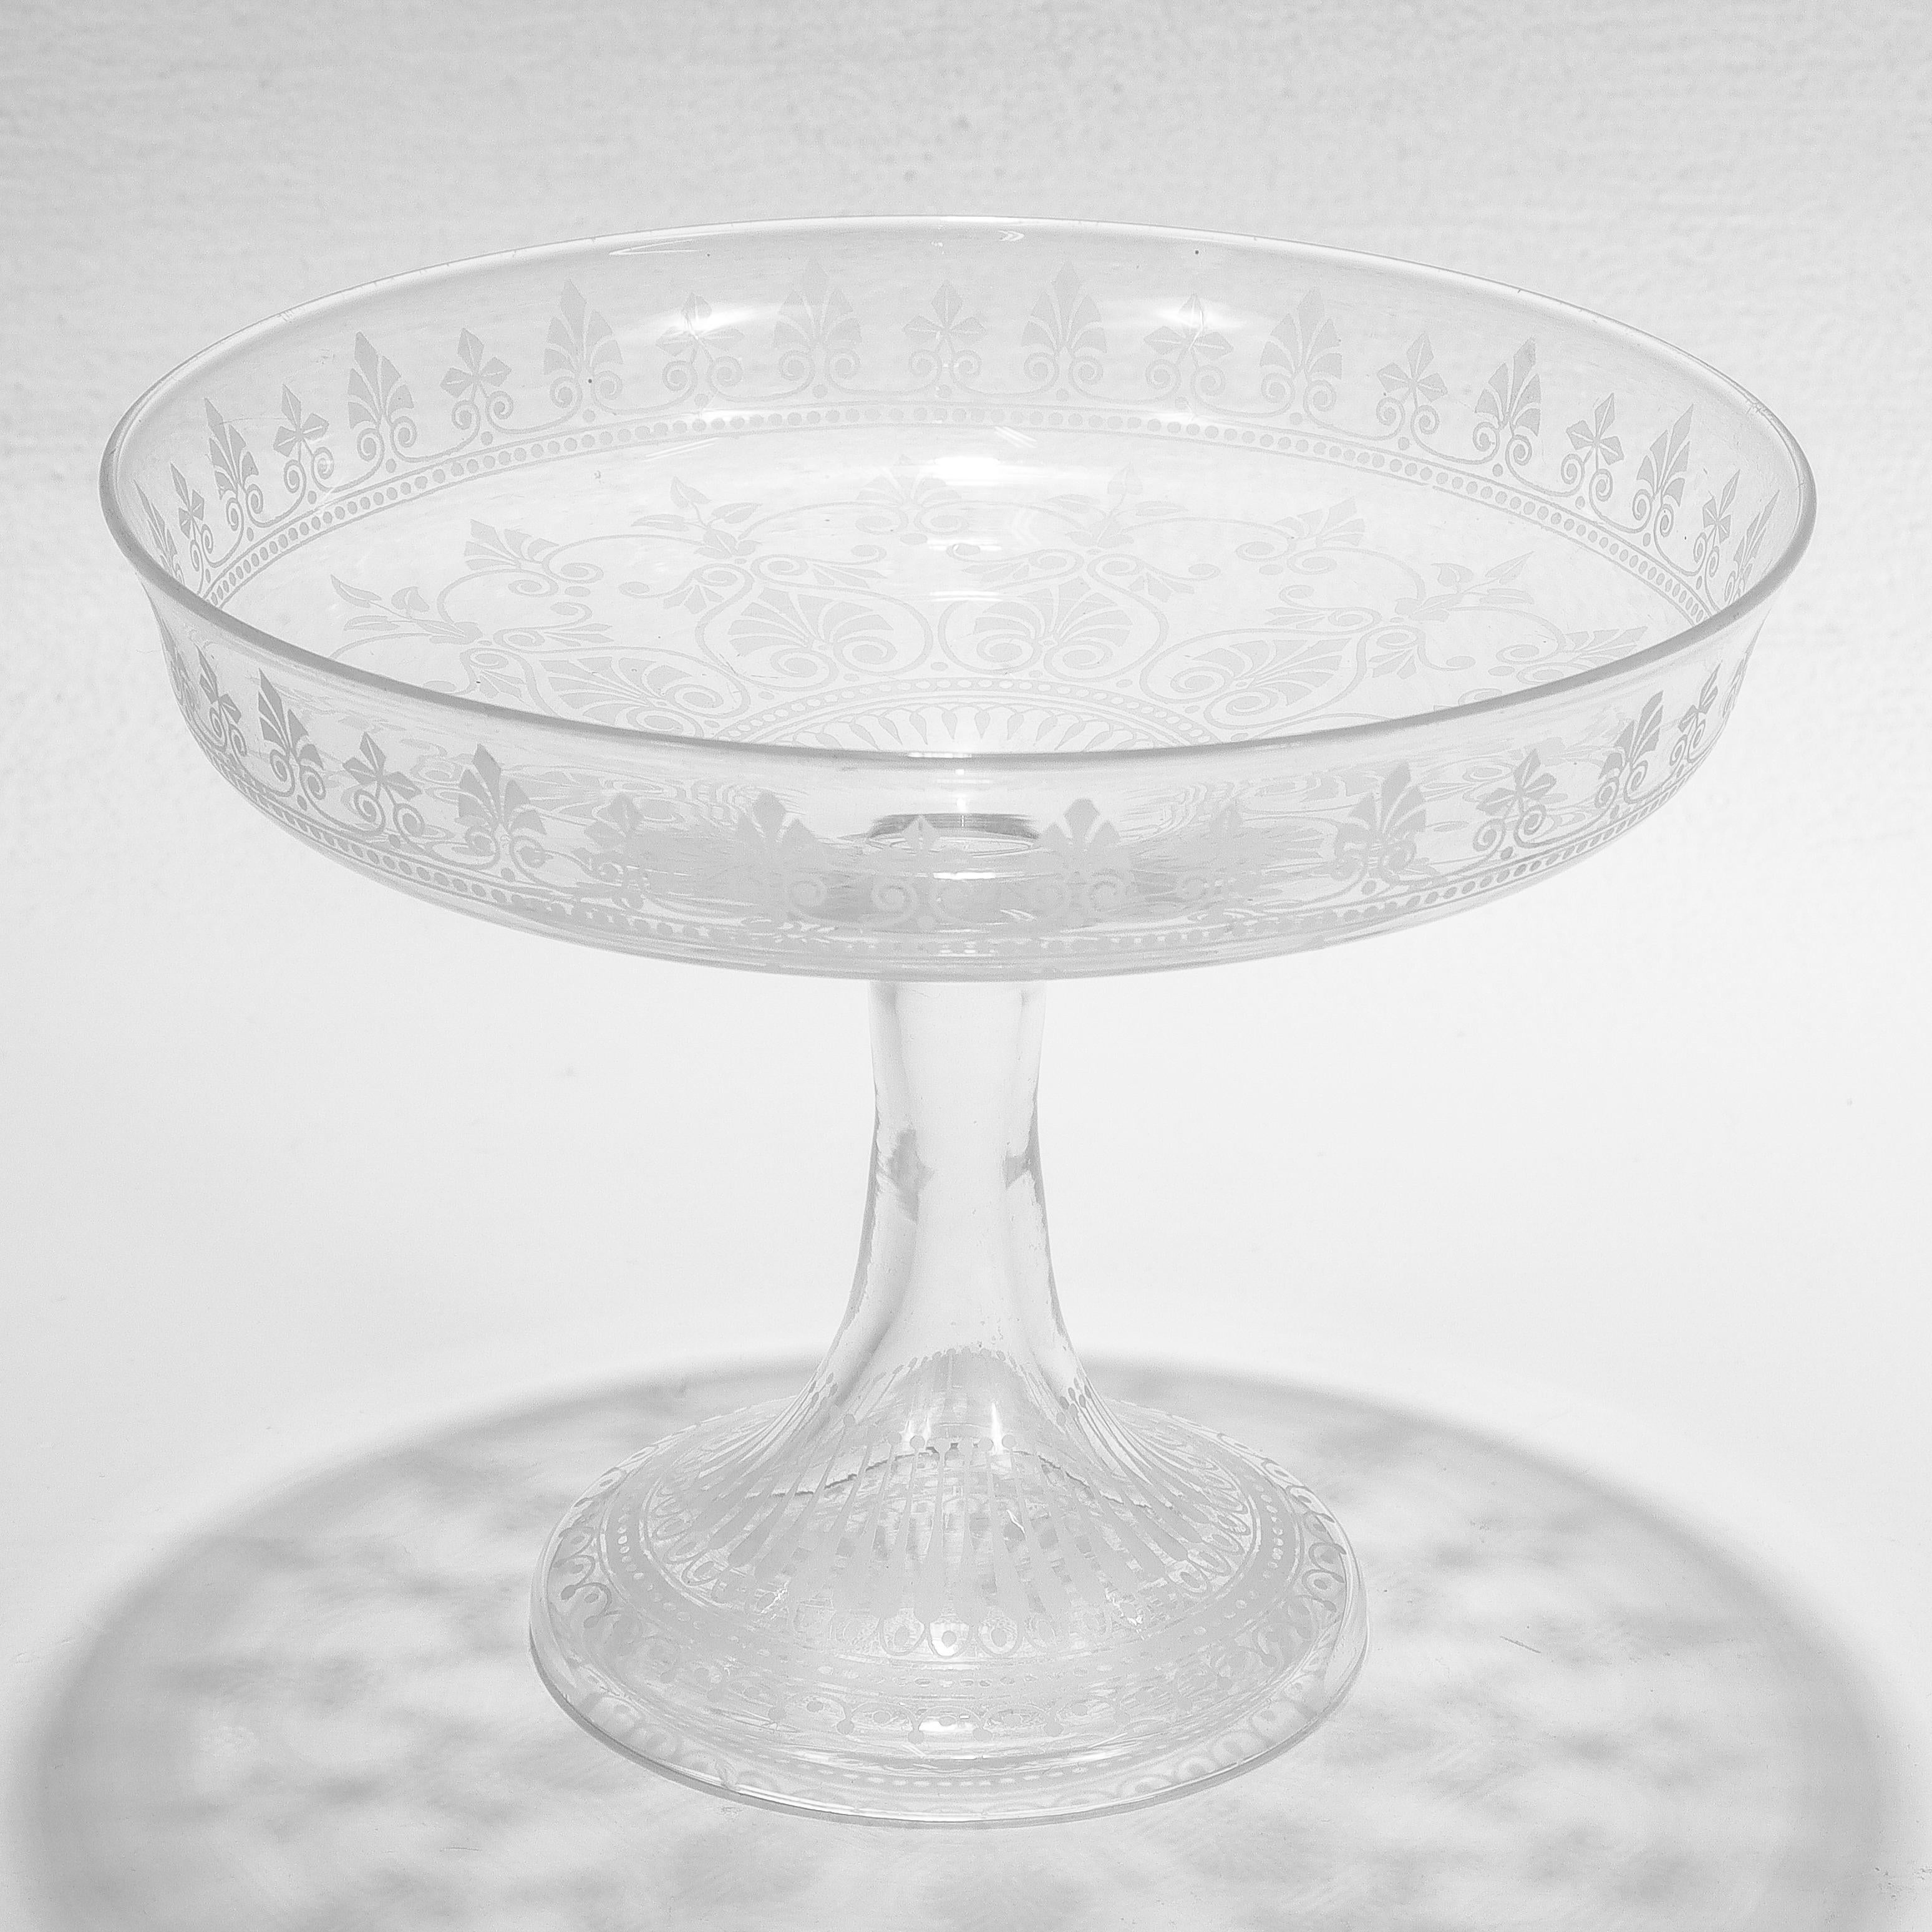 Antique Stourbridge Etched & Engraved Glass Footed Compote or Tazza For Sale 1